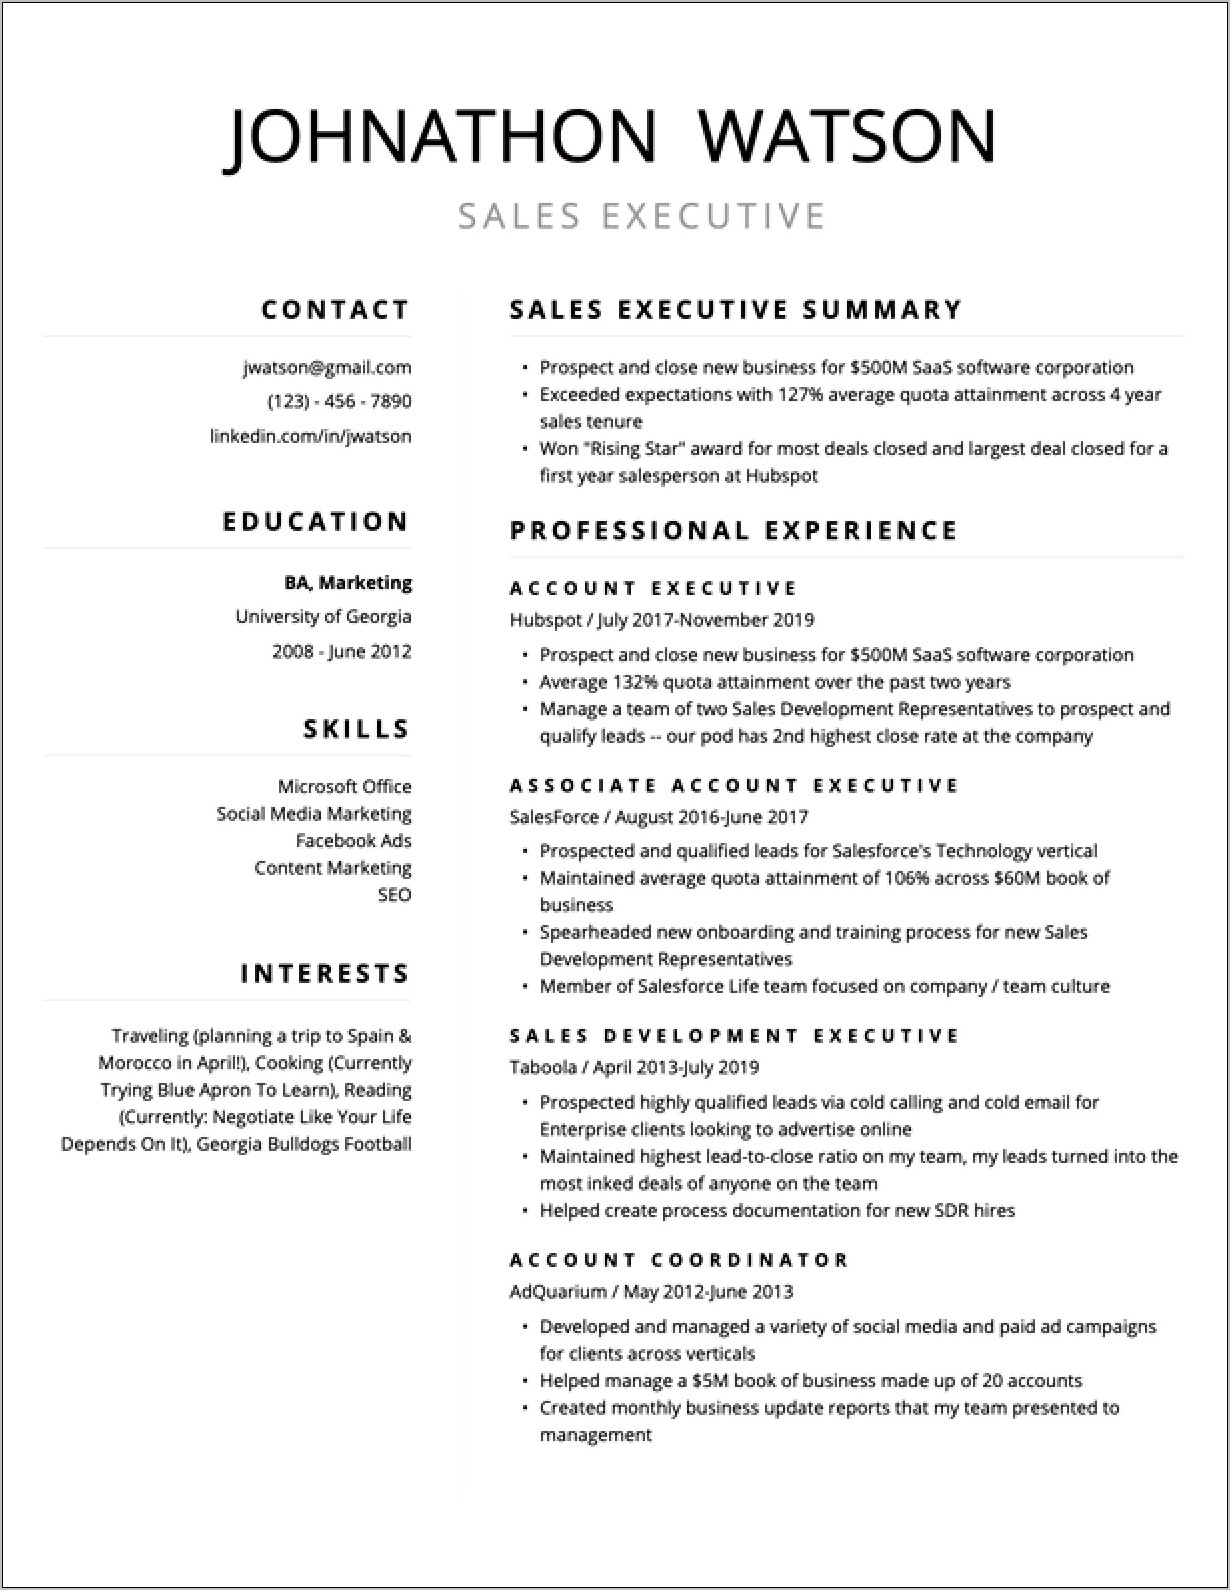 Resume Examples People Whitout Experience